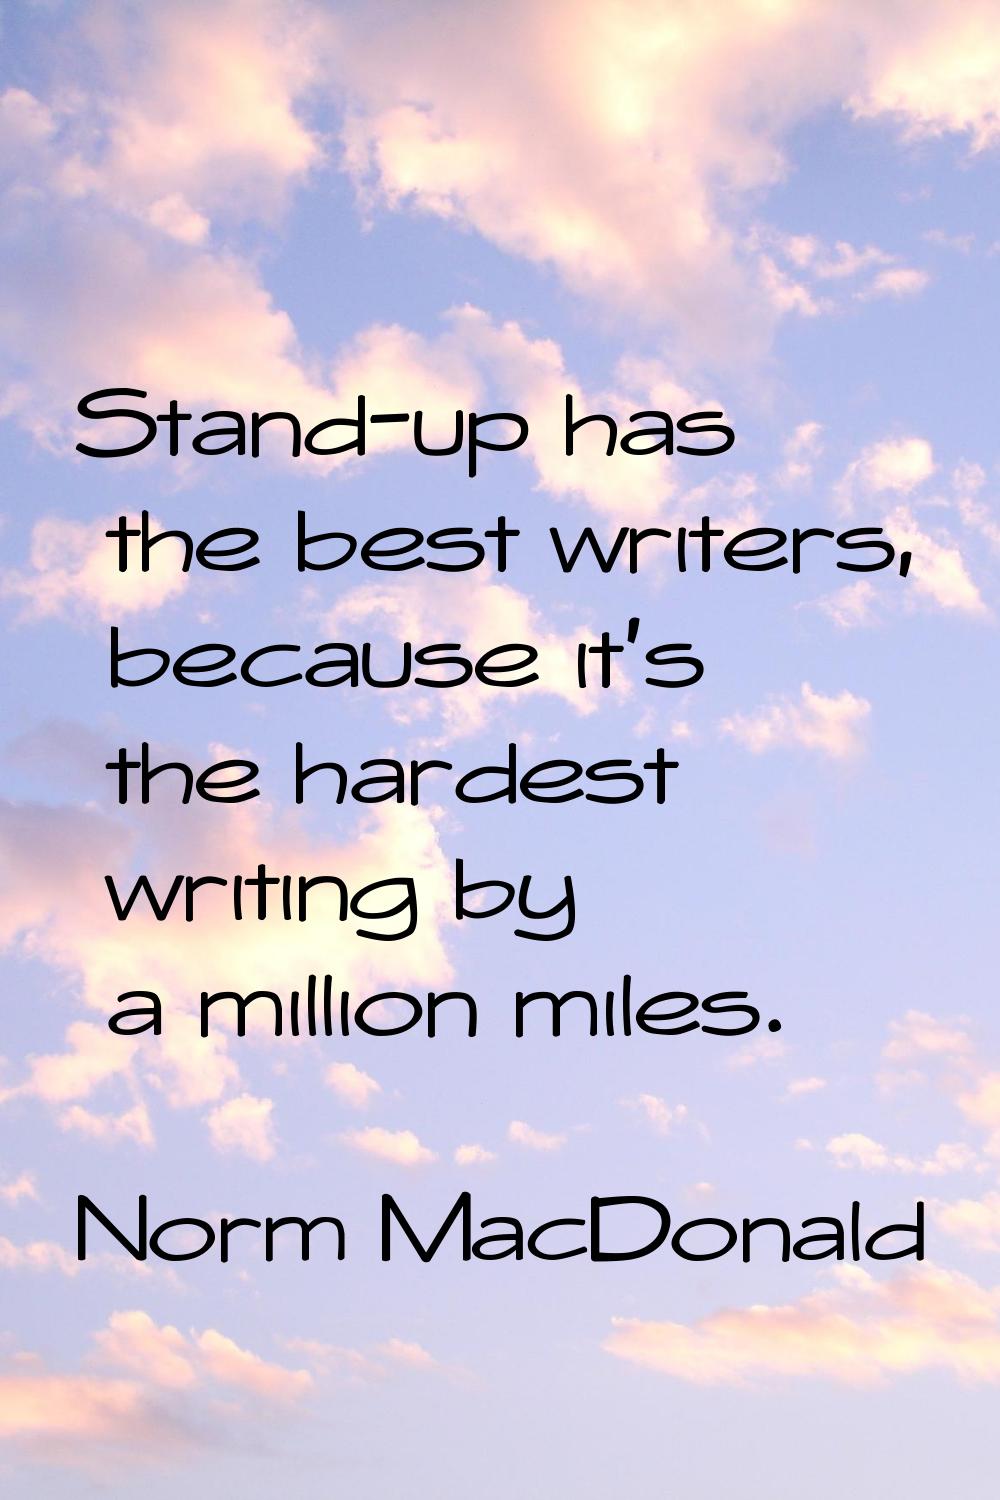 Stand-up has the best writers, because it's the hardest writing by a million miles.